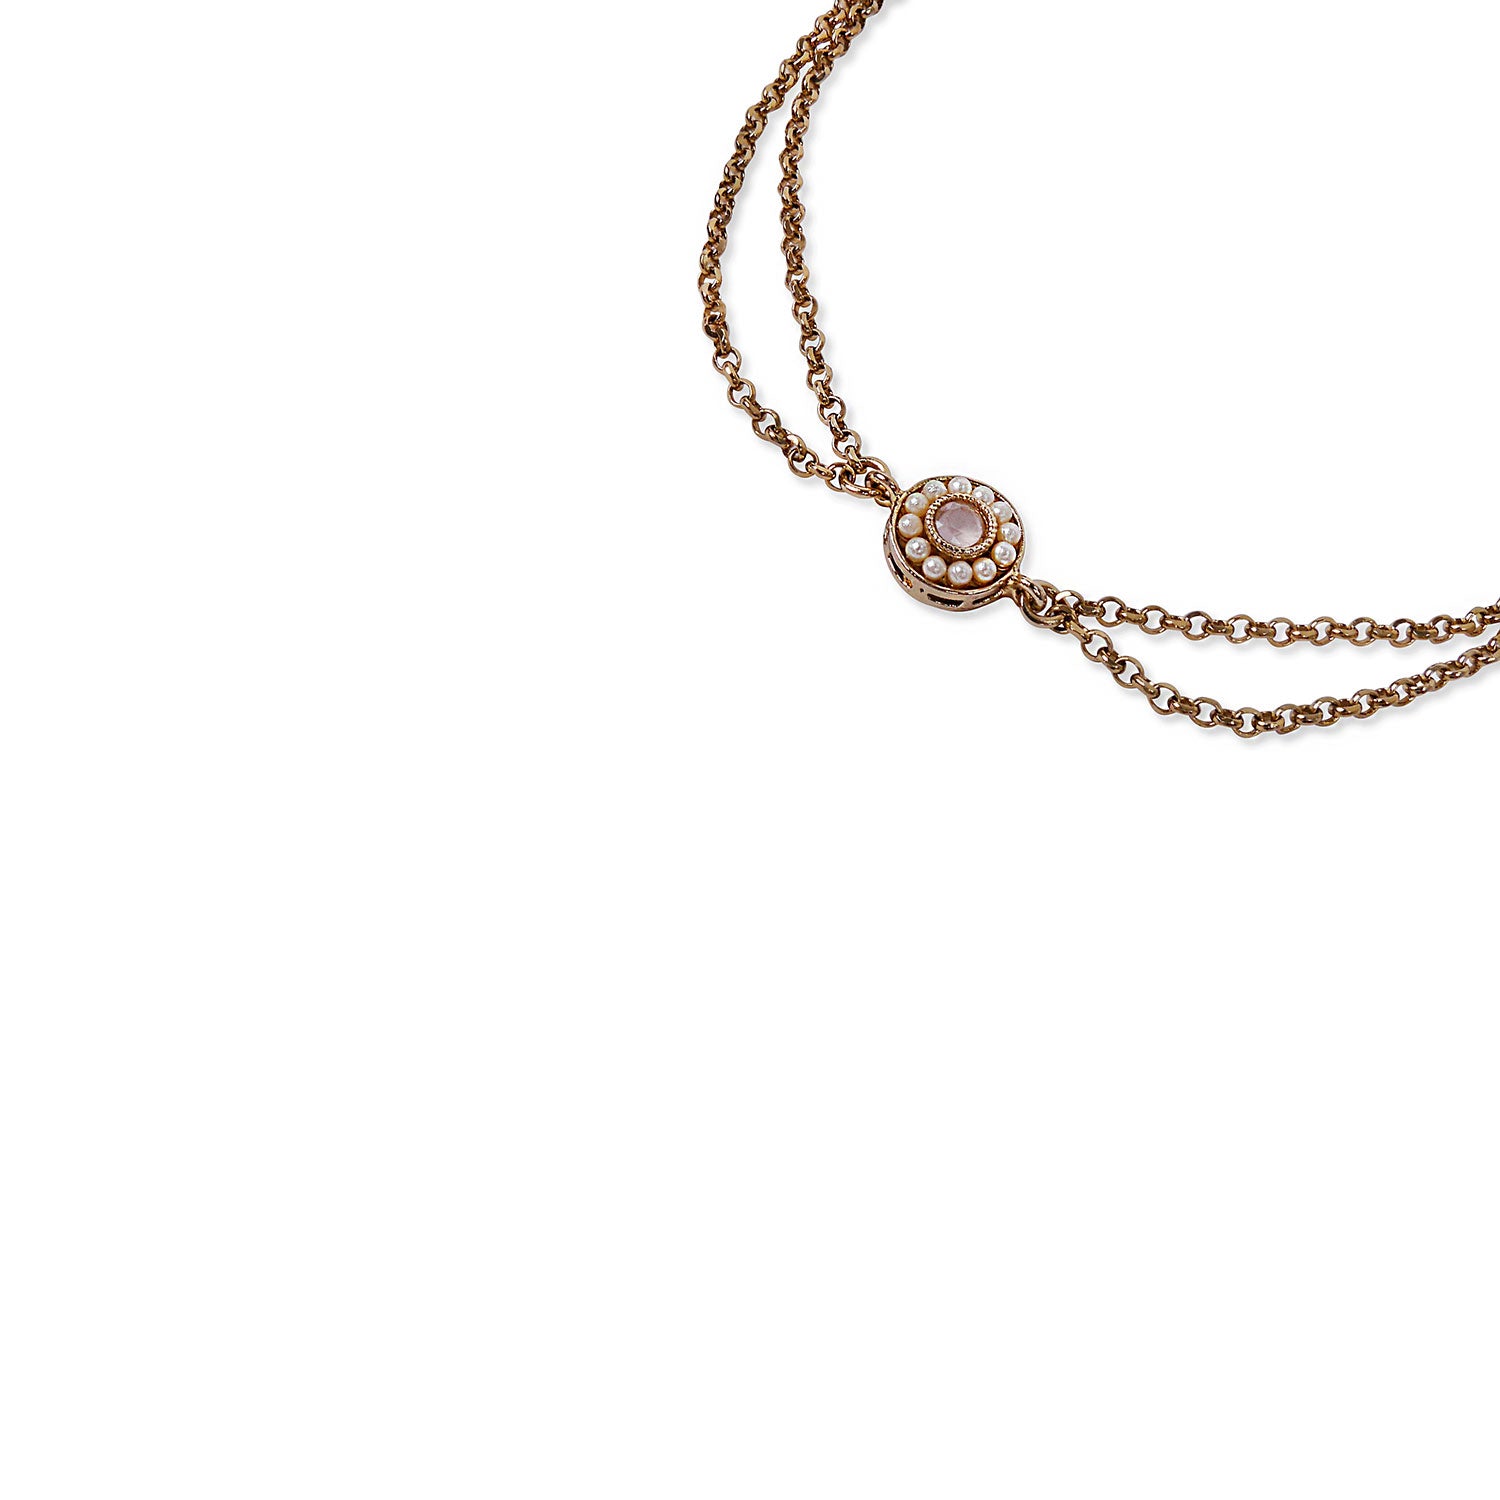 Leela Double Chain Anklet in Baby Pink